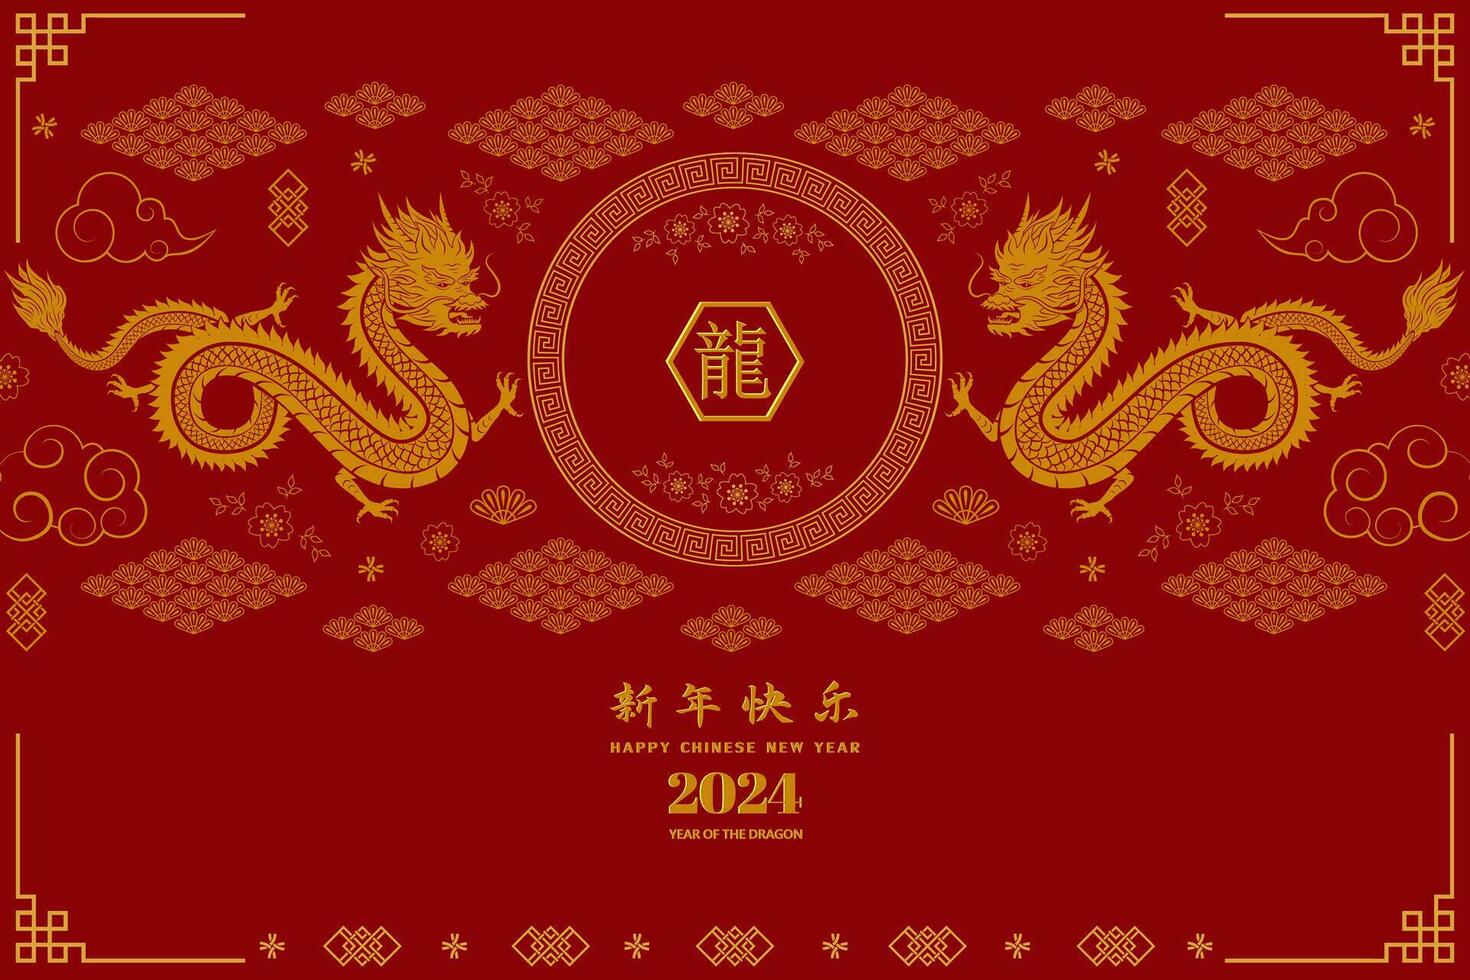 Happy Chinese New Year 2024 greeting card,gold dragon zodiac sign with asian elements isolated on red background,Chinese translate mean happy new year 2024,year of the dragon vector